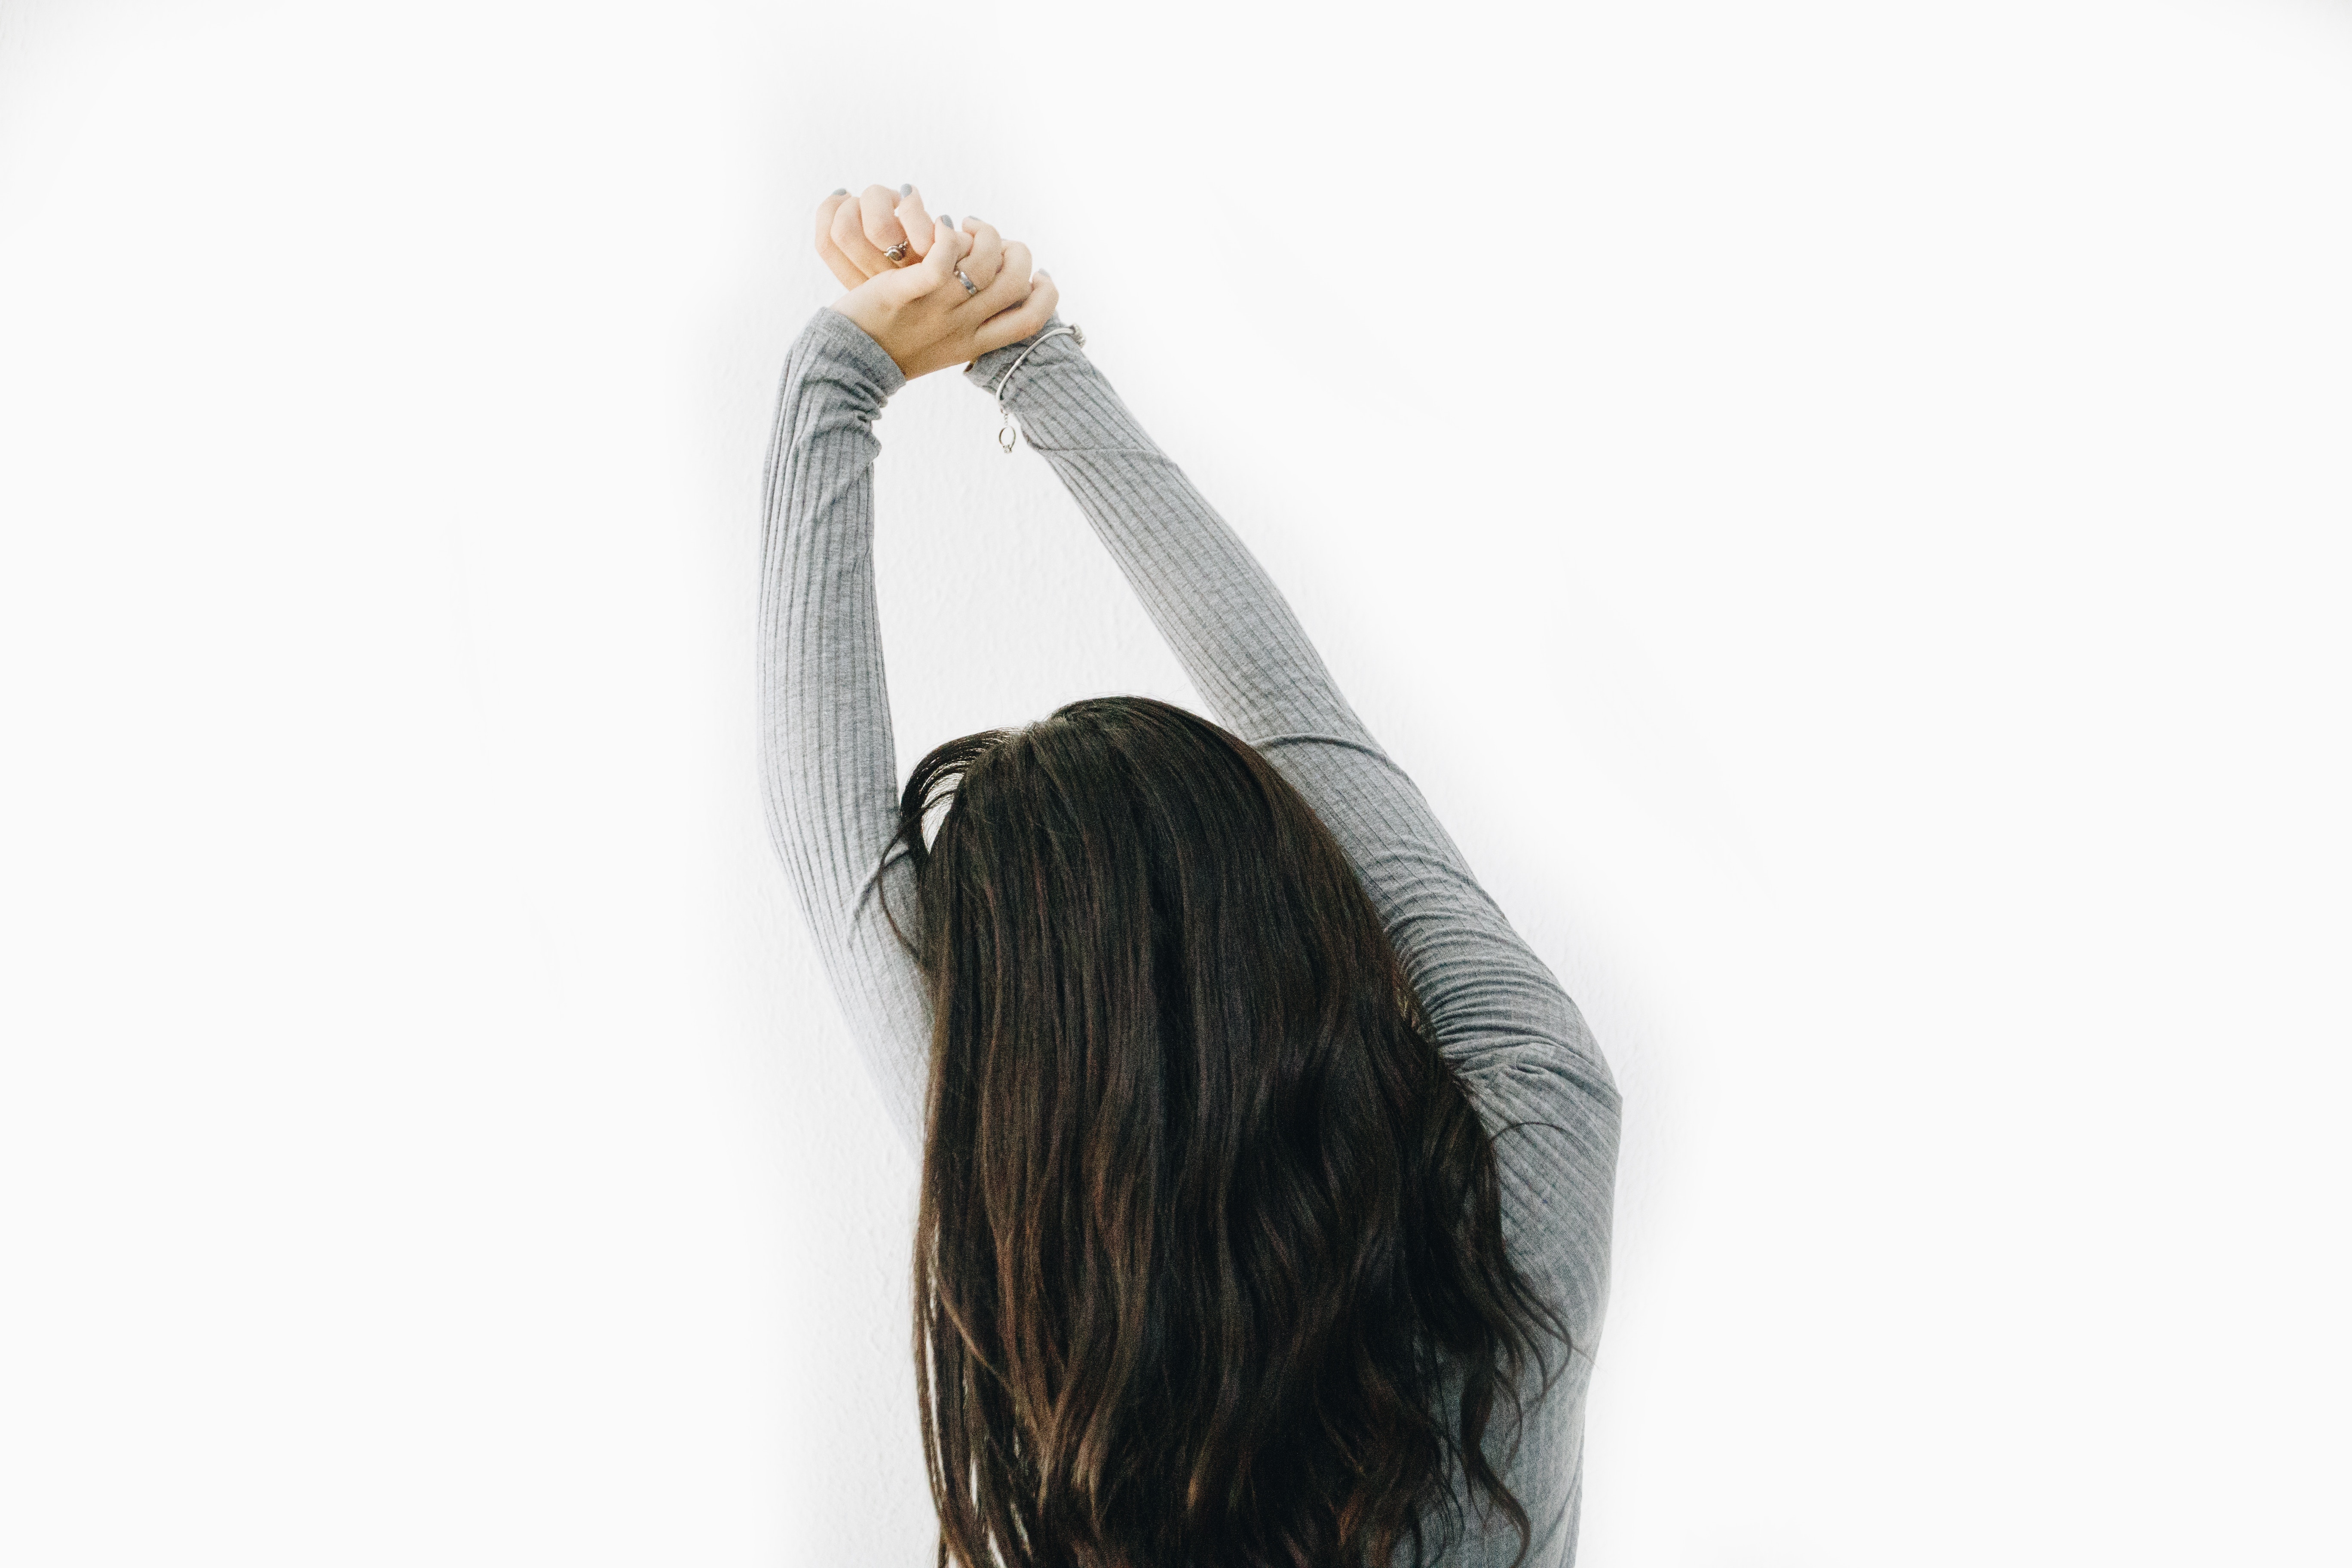 Wake up feeling energised: person stretching their arms up over their head from behind.